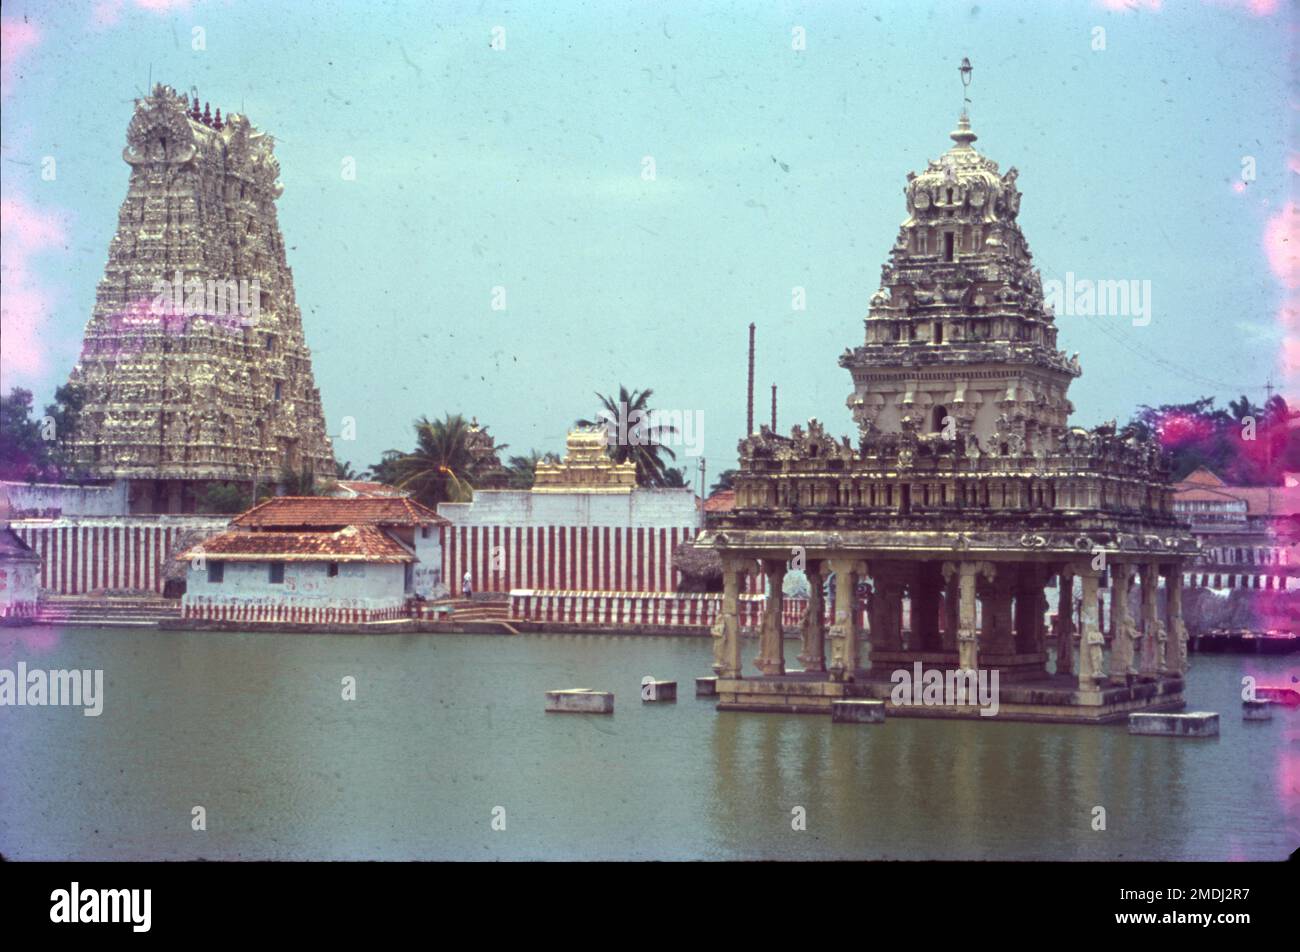 Suchindram Temple also known as Thanumalayan Temple is located in Suchindram district of Kanyakumari, at a distance of around 11 km from Kanyakumari. The striking aspect of this temple is that it is dedicated to the Trinity of God, Lord Shiva, Lord Vishnu and Lord Brahma. Stock Photo